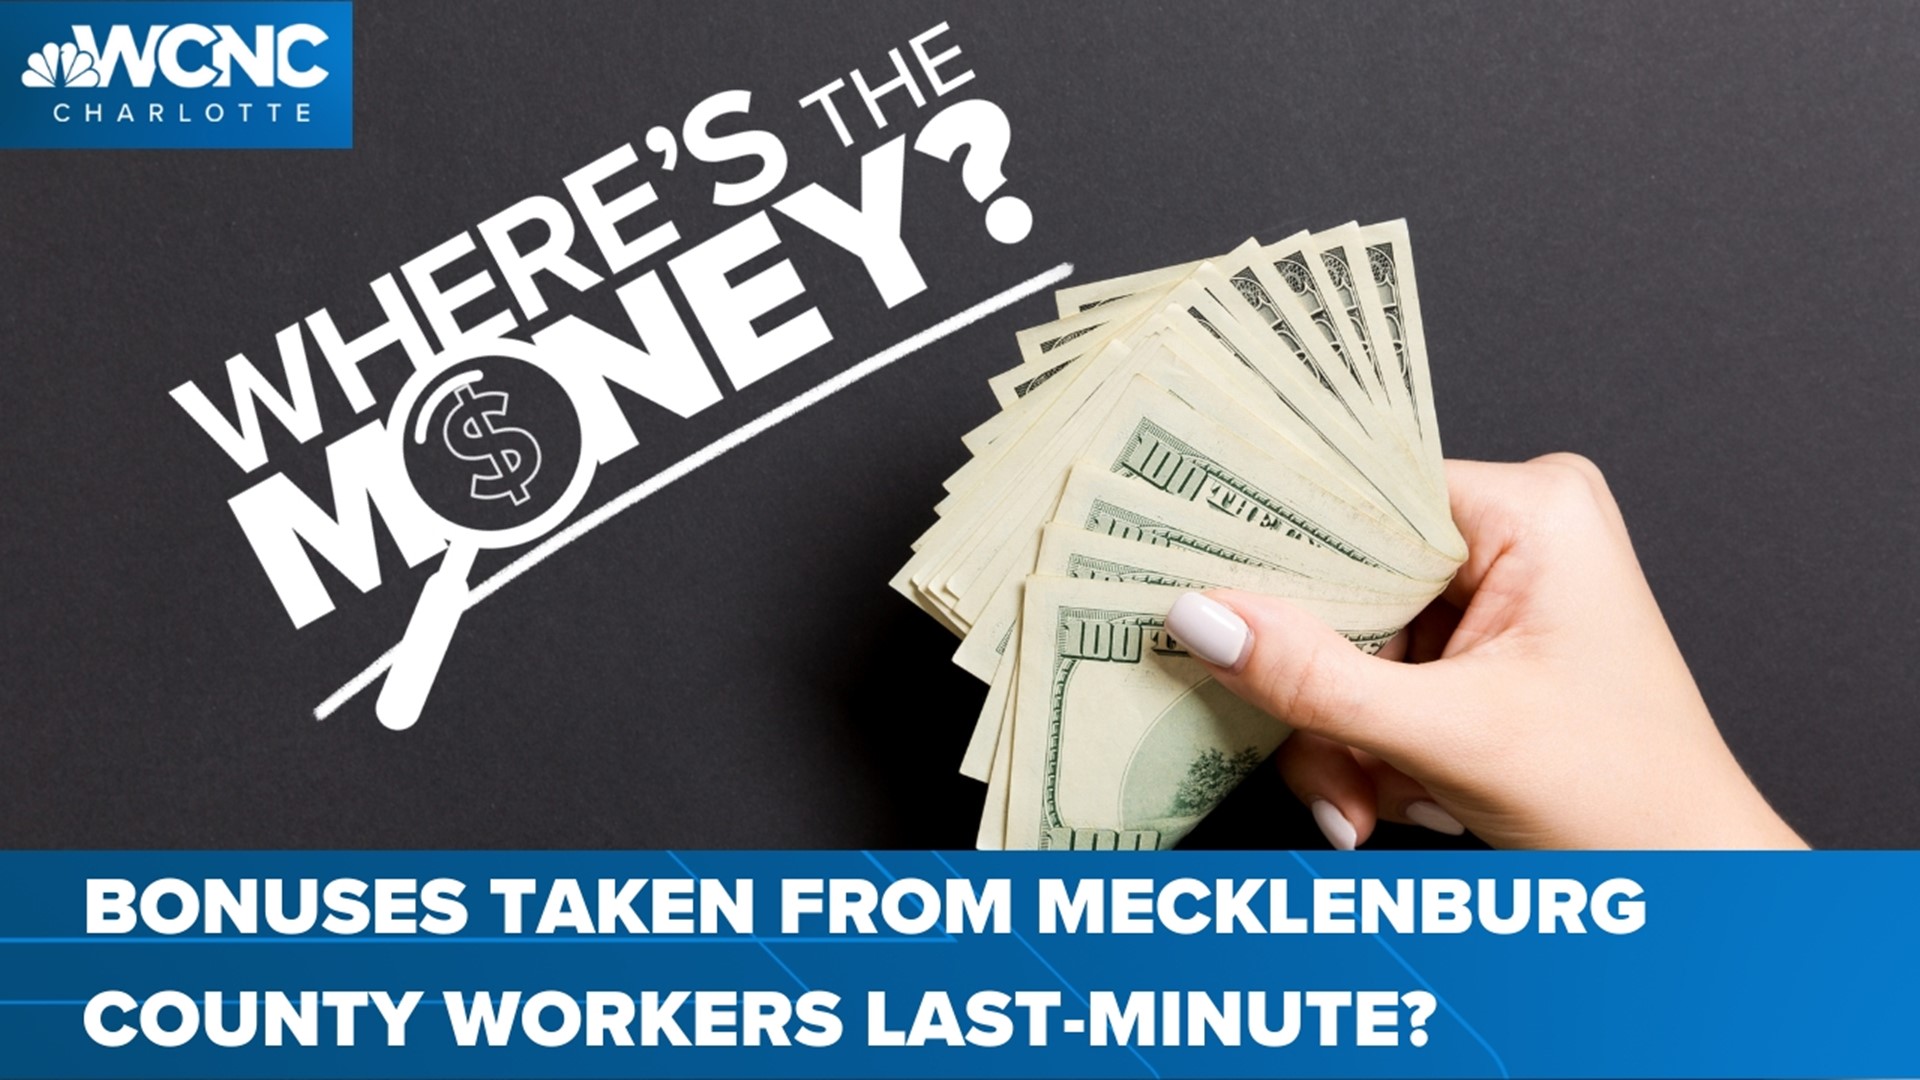 While most county workers did get that bonus check, others learned at the very last minute they didn't qualify for the extra cash.